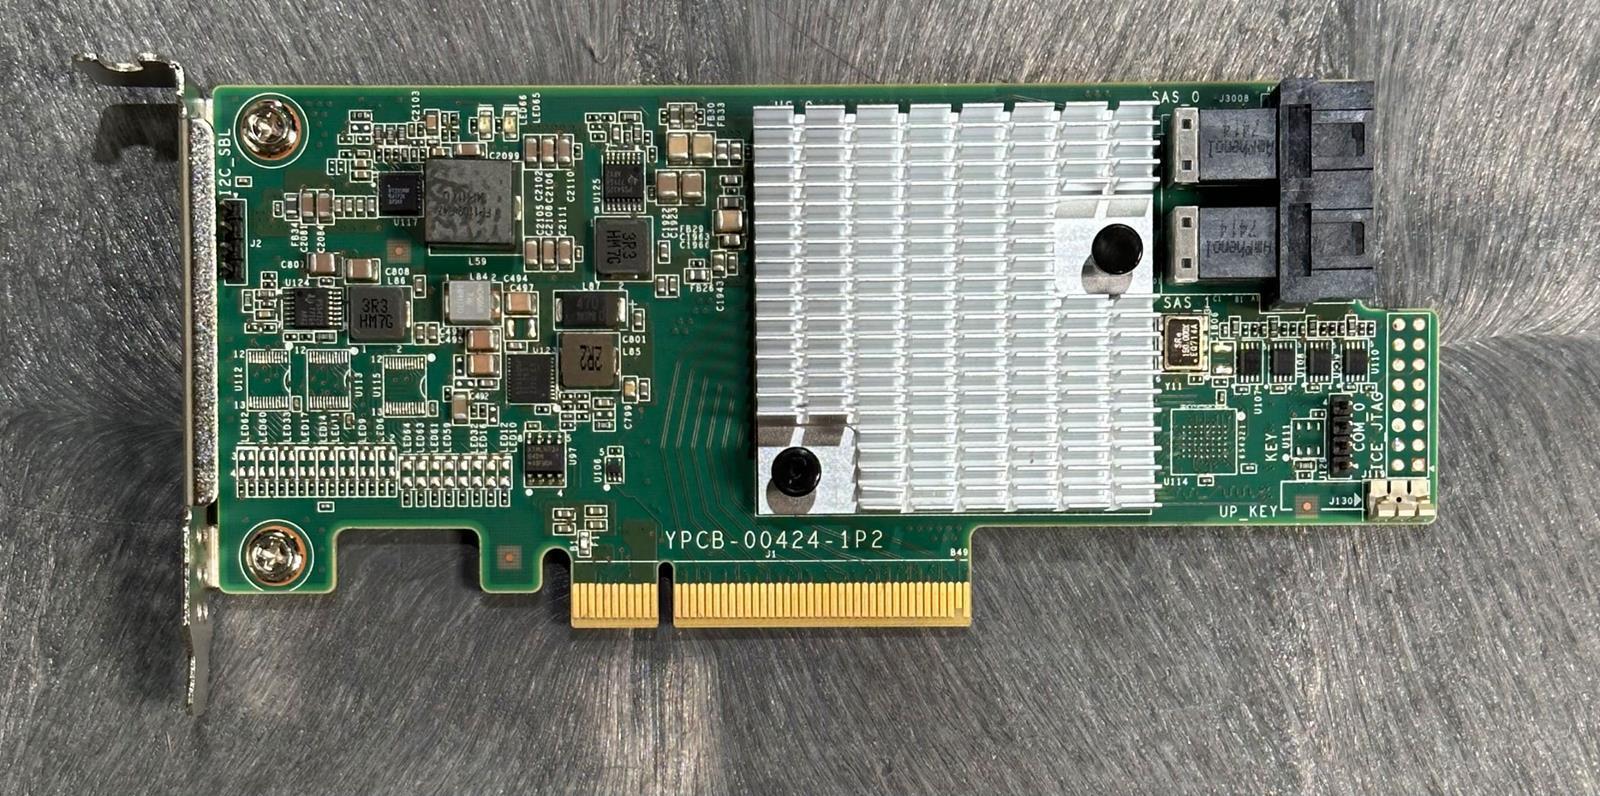 Inspur LSI YZCA-00424-101 Raid Card 12Gbps HBA Controller Low Profile 9300-8i